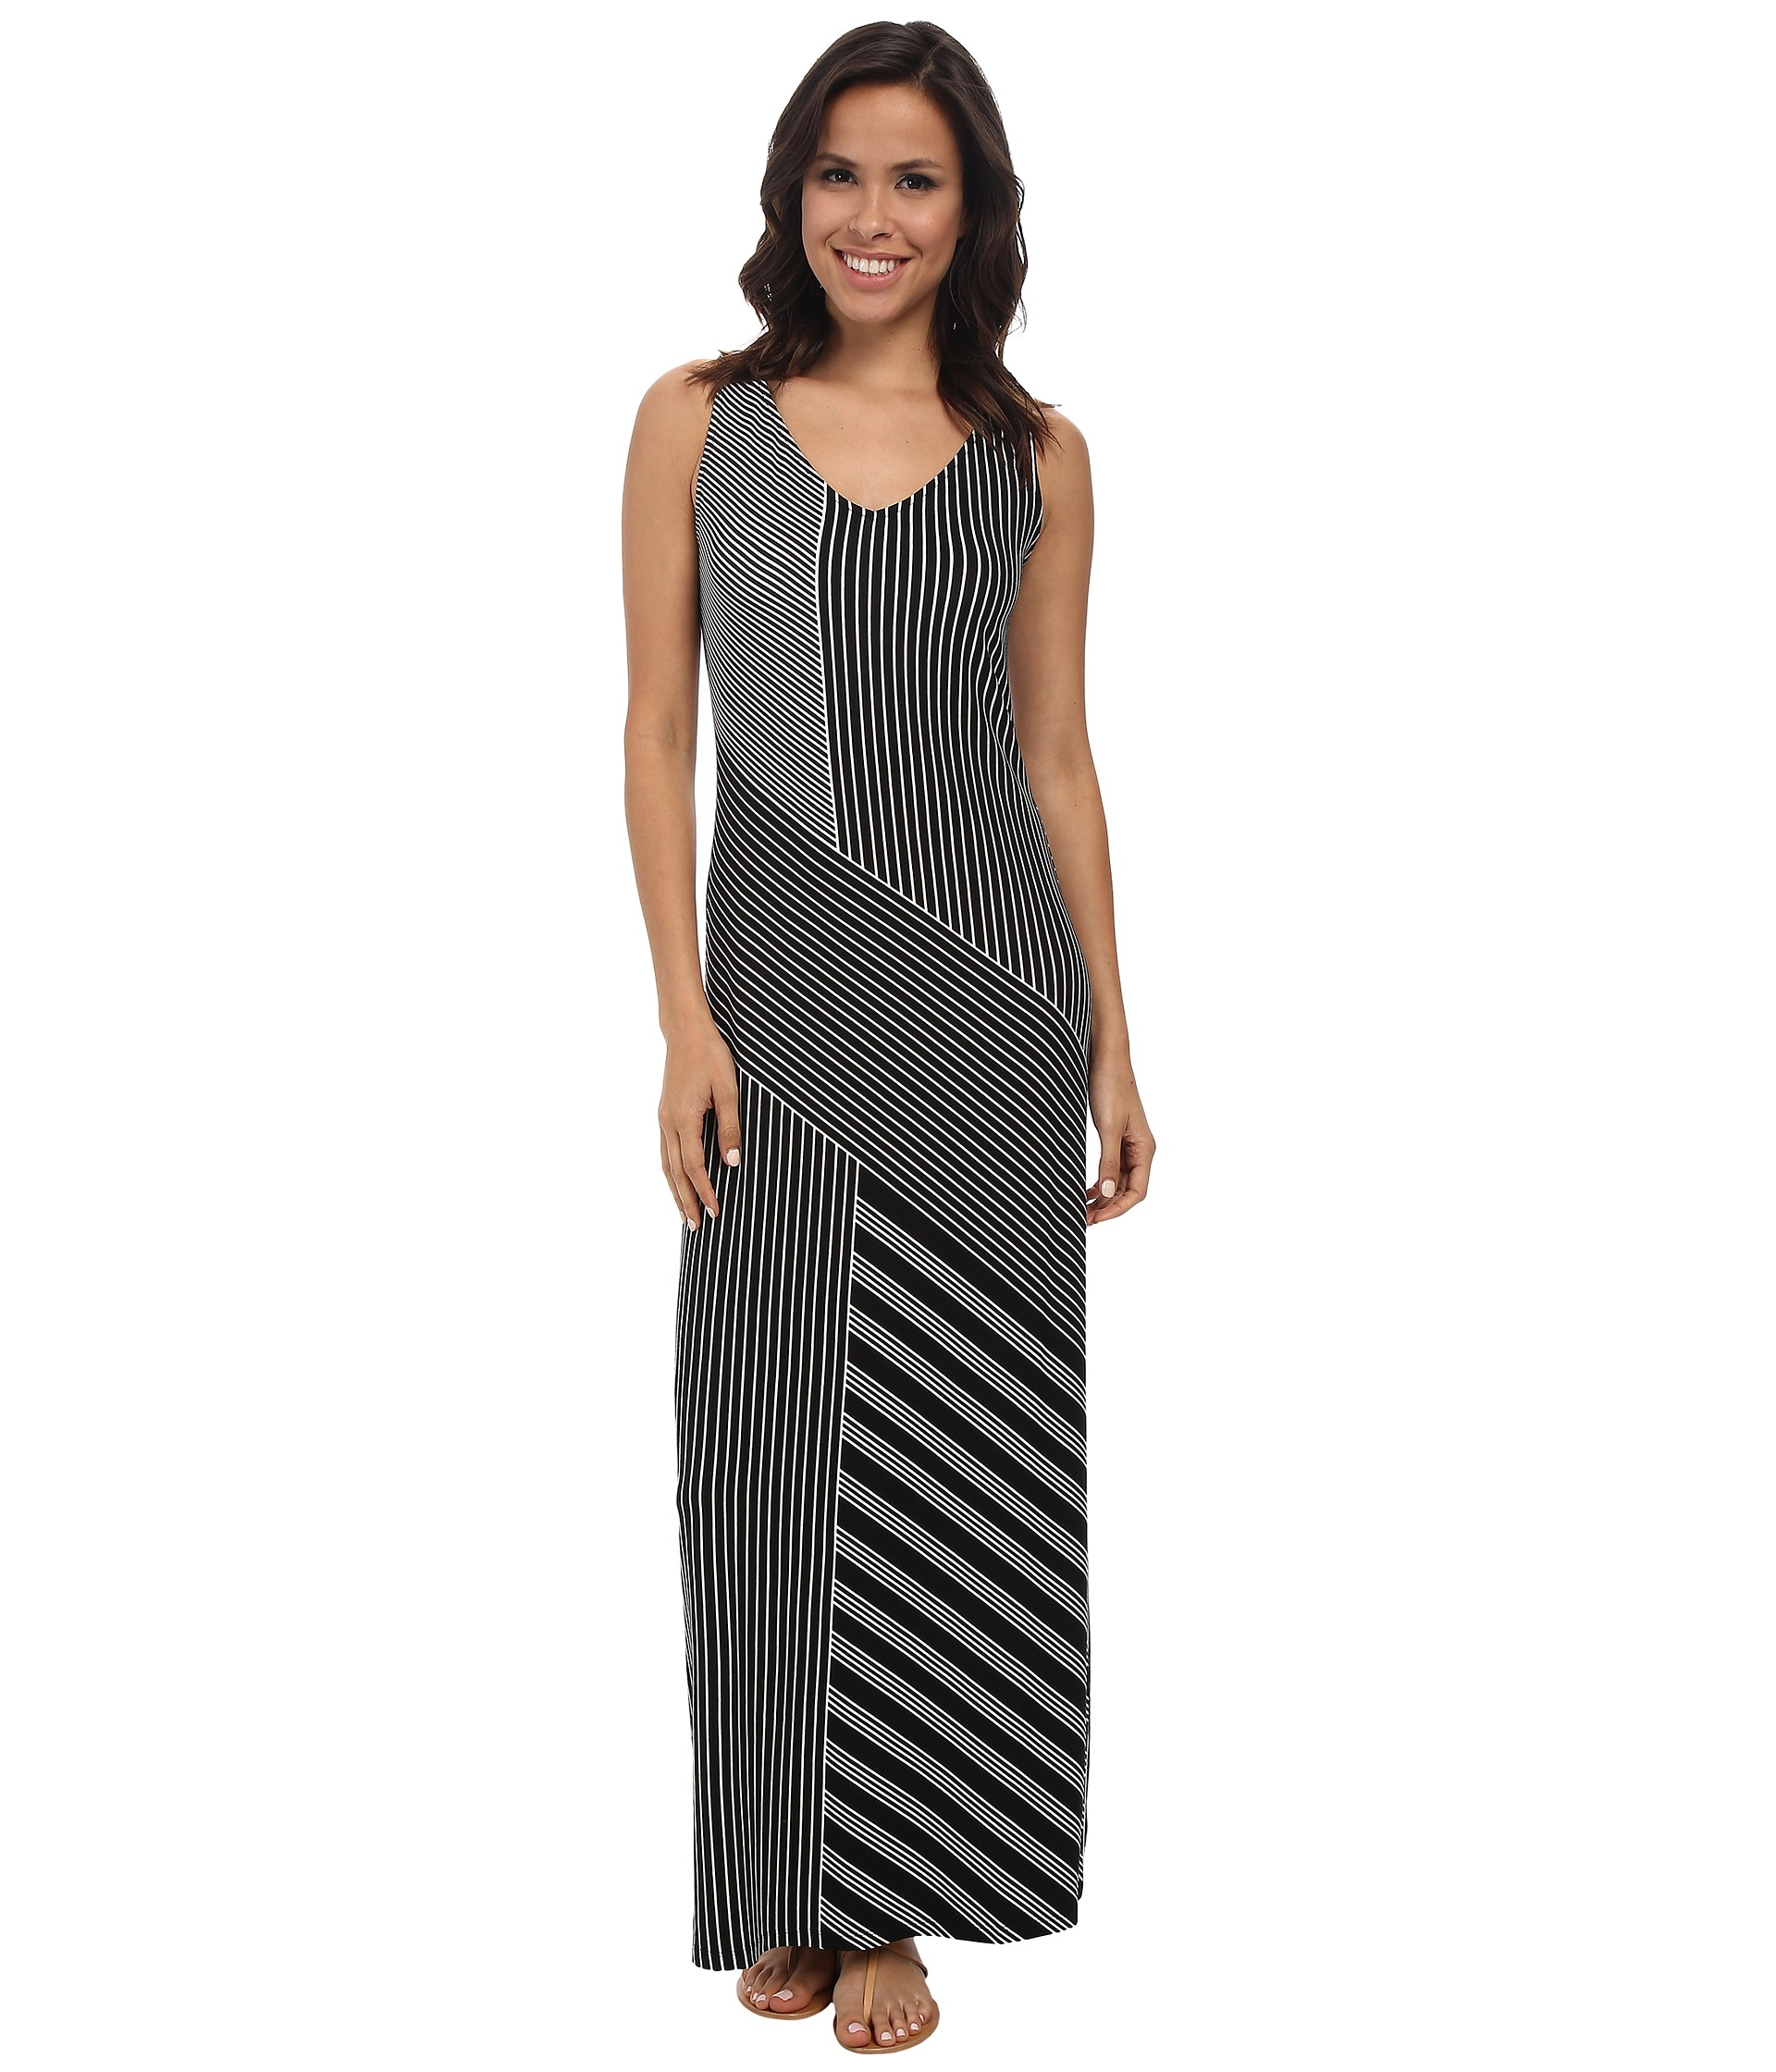 Lyst - Tommy Bahama Lucca Lines Long Dress in Black